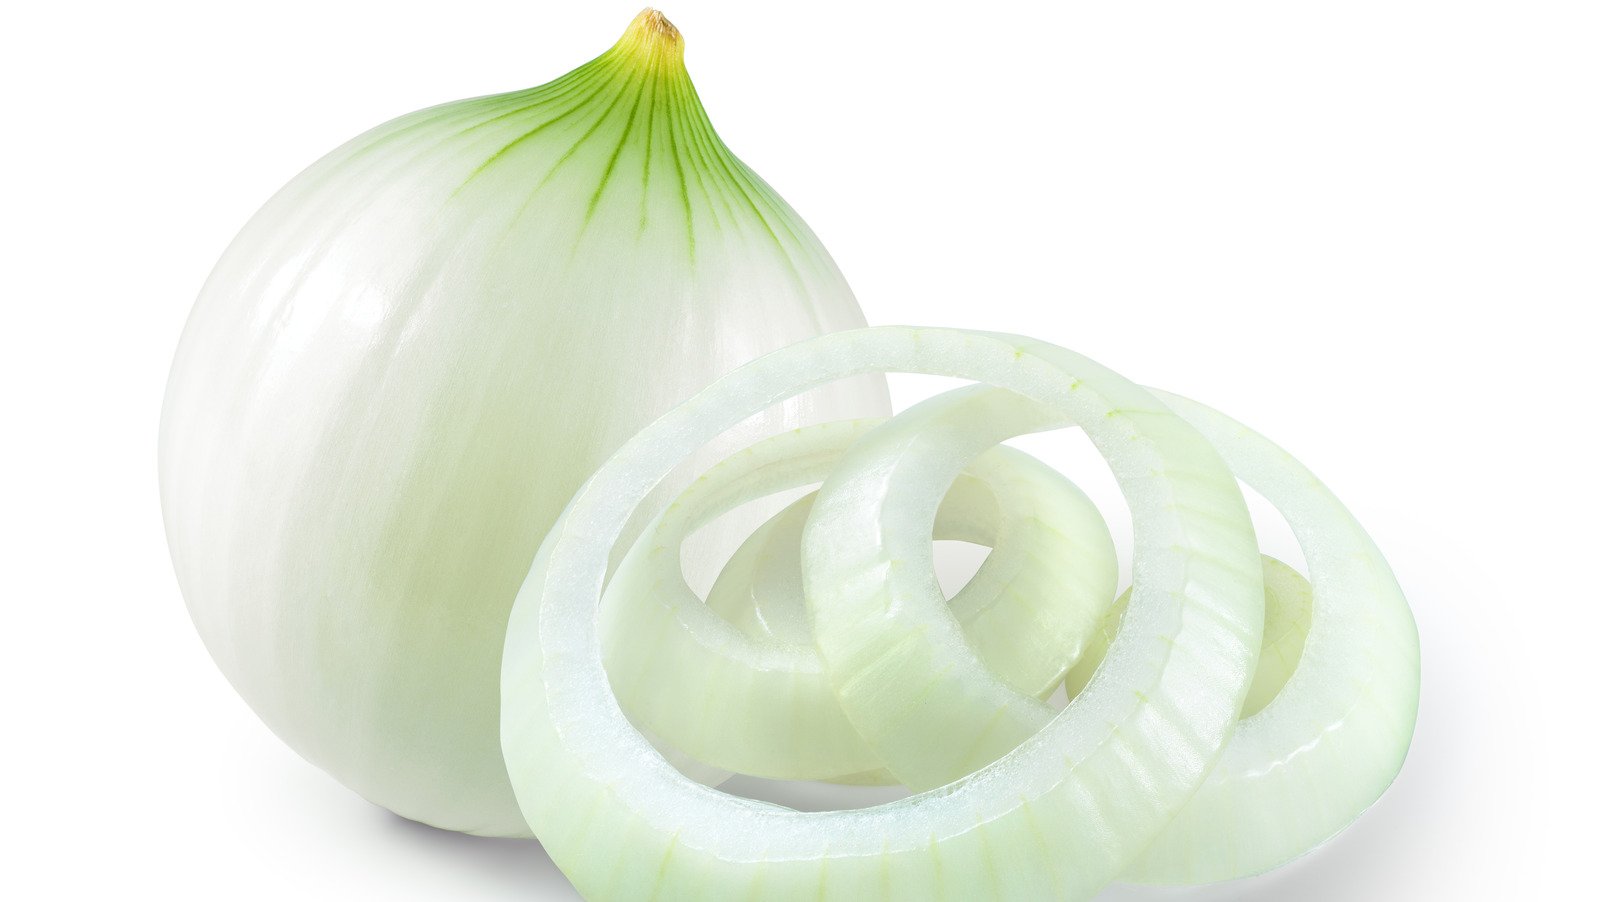 Why You Shouldn't Put Onions Down The Drain